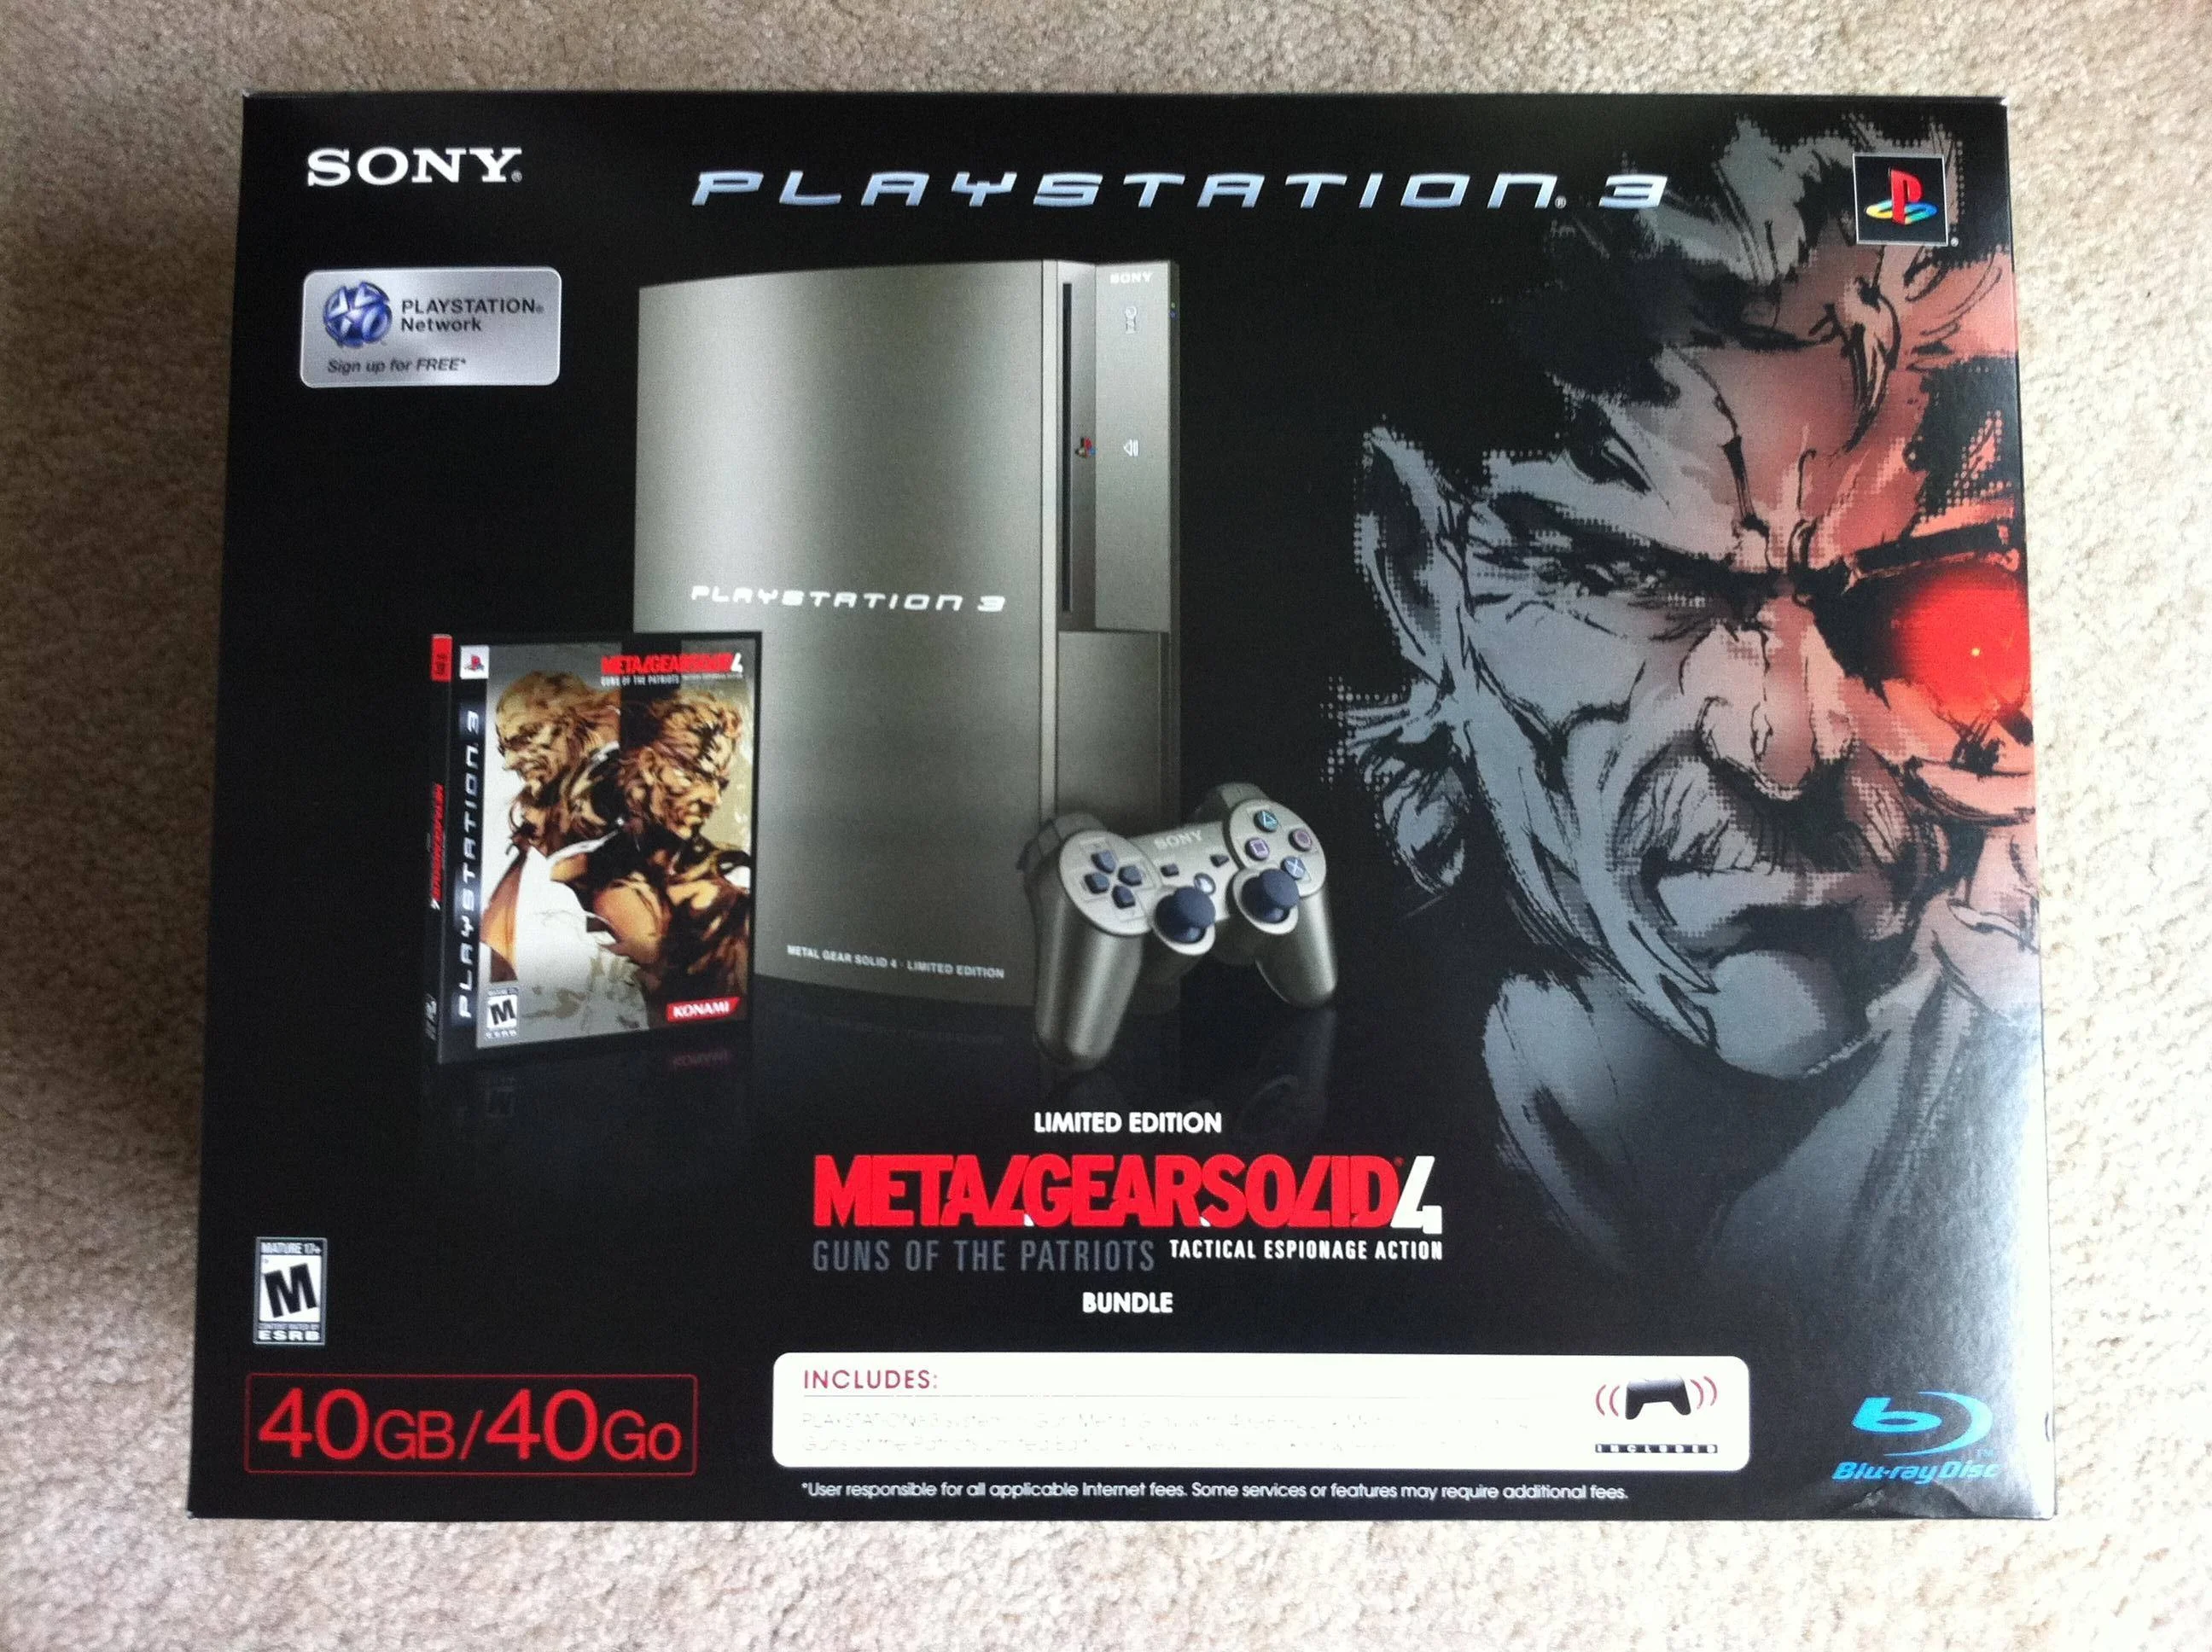 Ps3 игры 5. Metal Gear Limited Edition ps3. Metal Gear Solid 4 ps3 Limited Edition. Ps3 Slim Limited Edition. Sony PLAYSTATION 3 Metal Gear Solid Limited Edition.